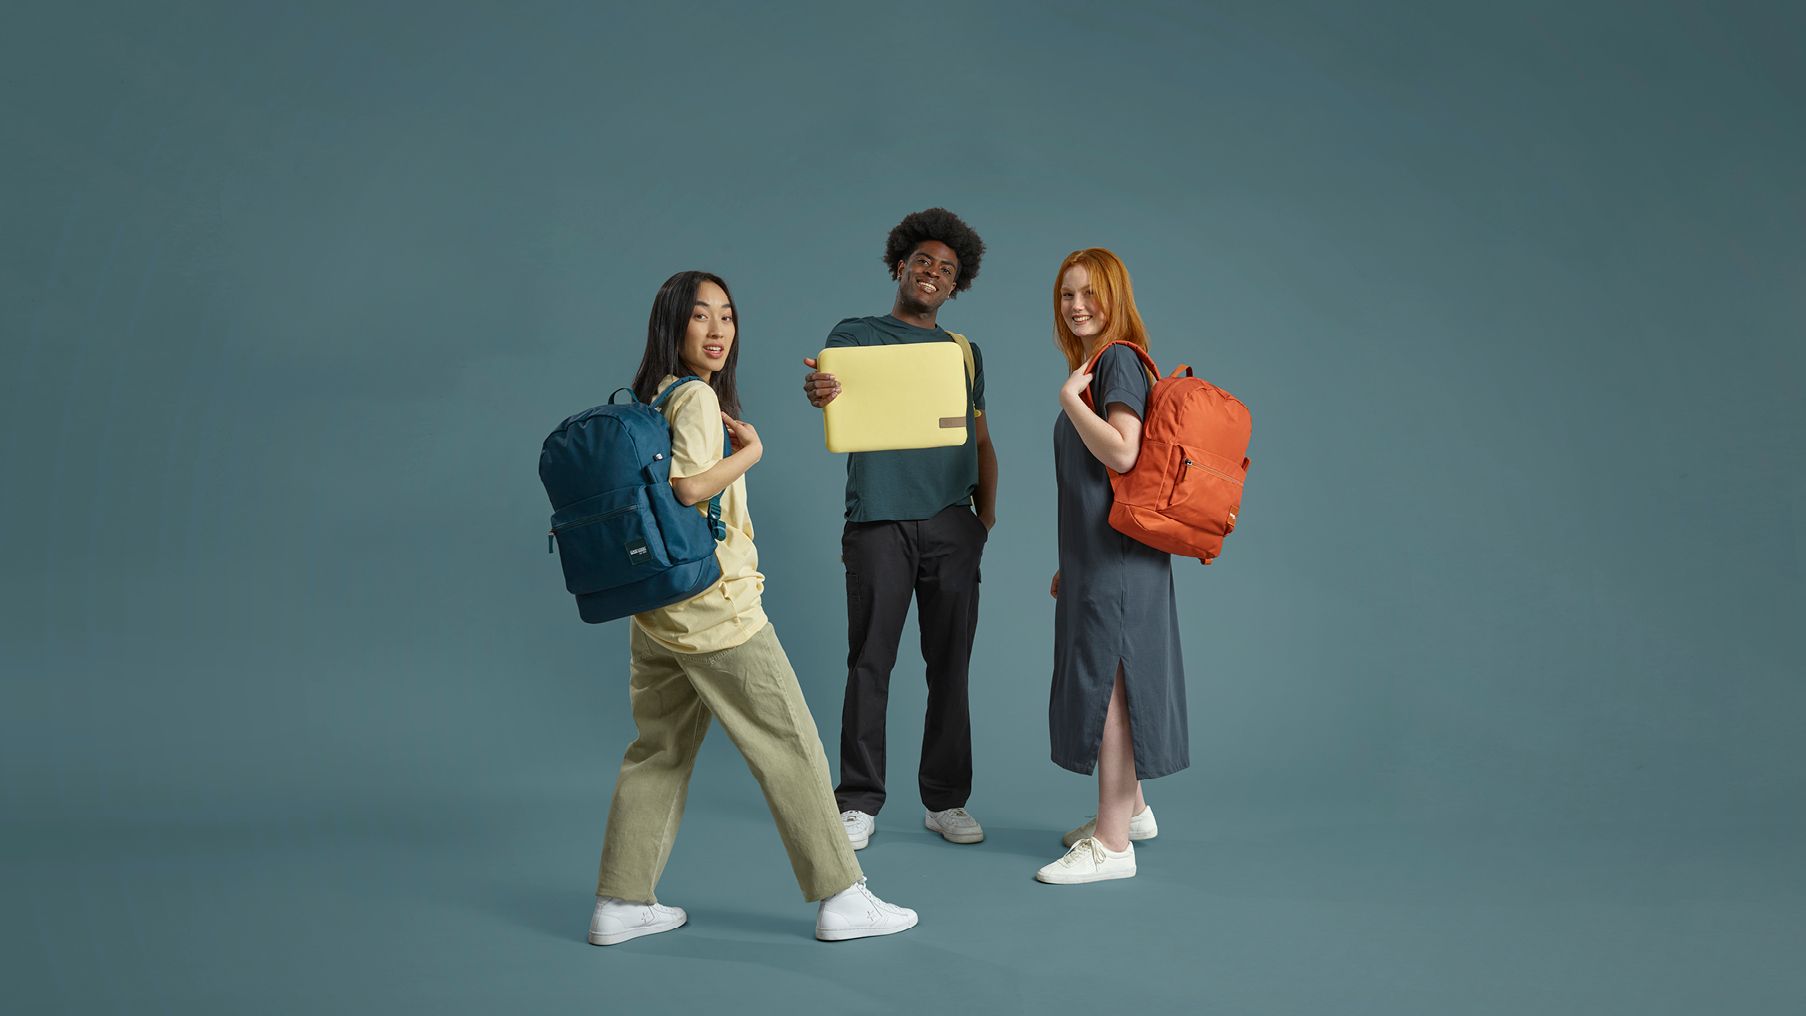 Three people standing in a circle, two have backpacks and one is holding a laptopsleeve.